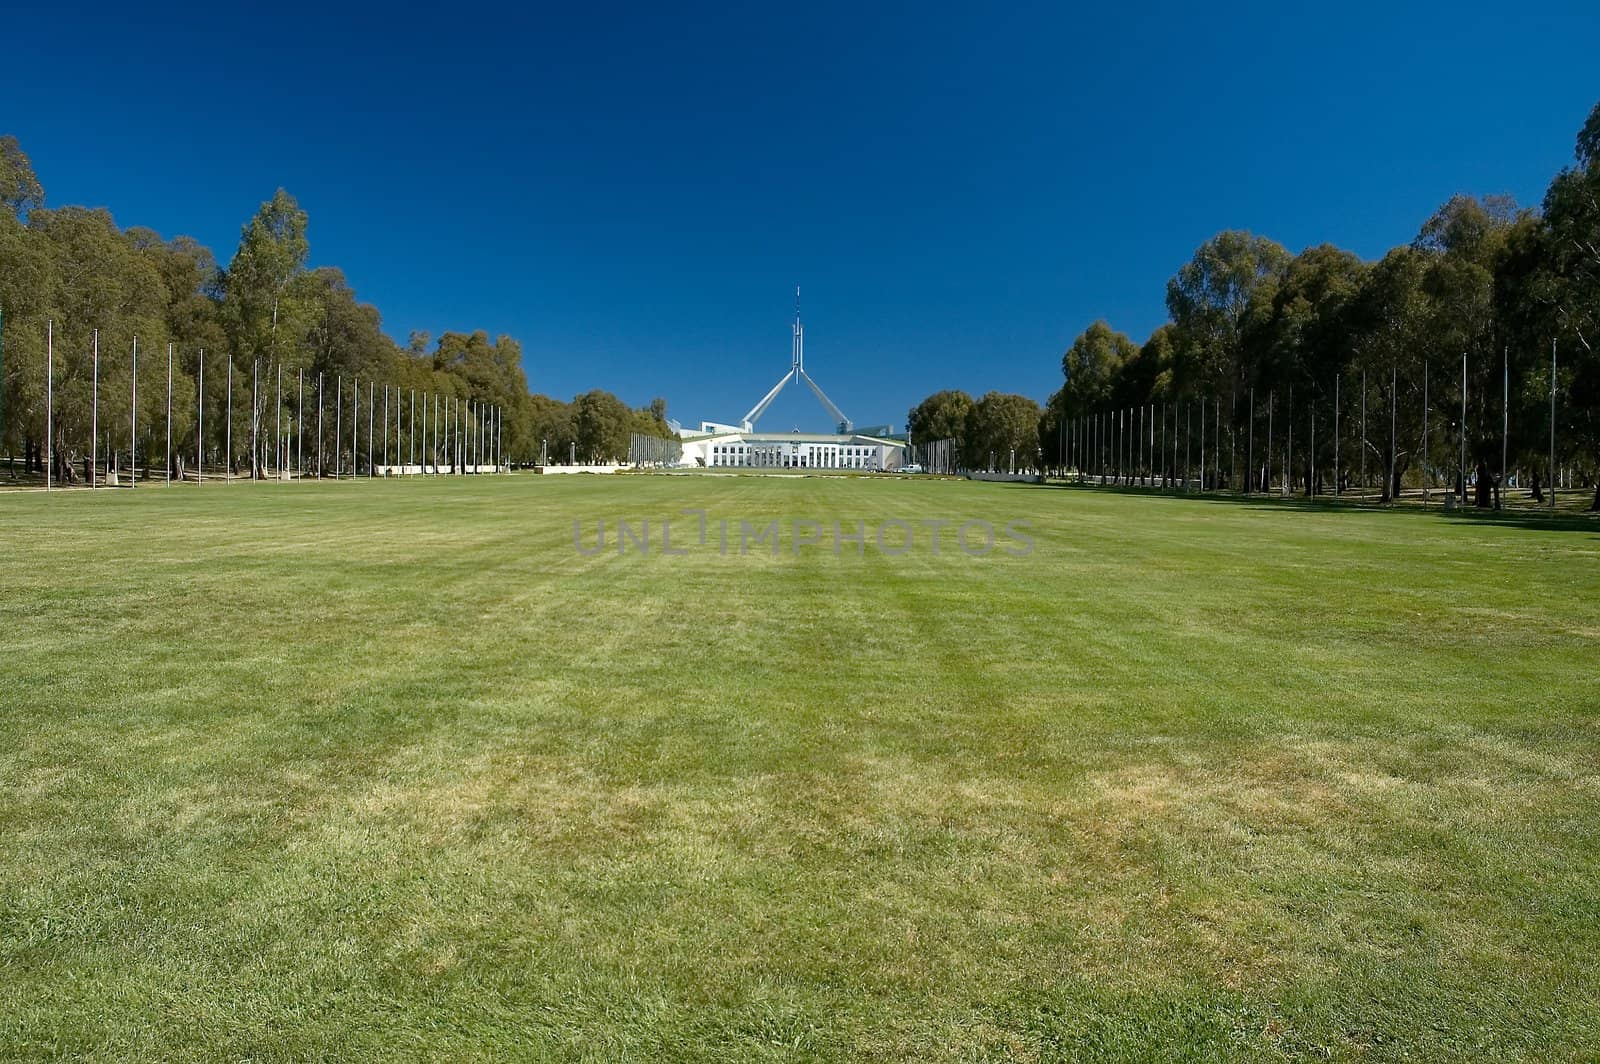 Canberra Parliament House in distance, green grass in foreground, clear blue sky